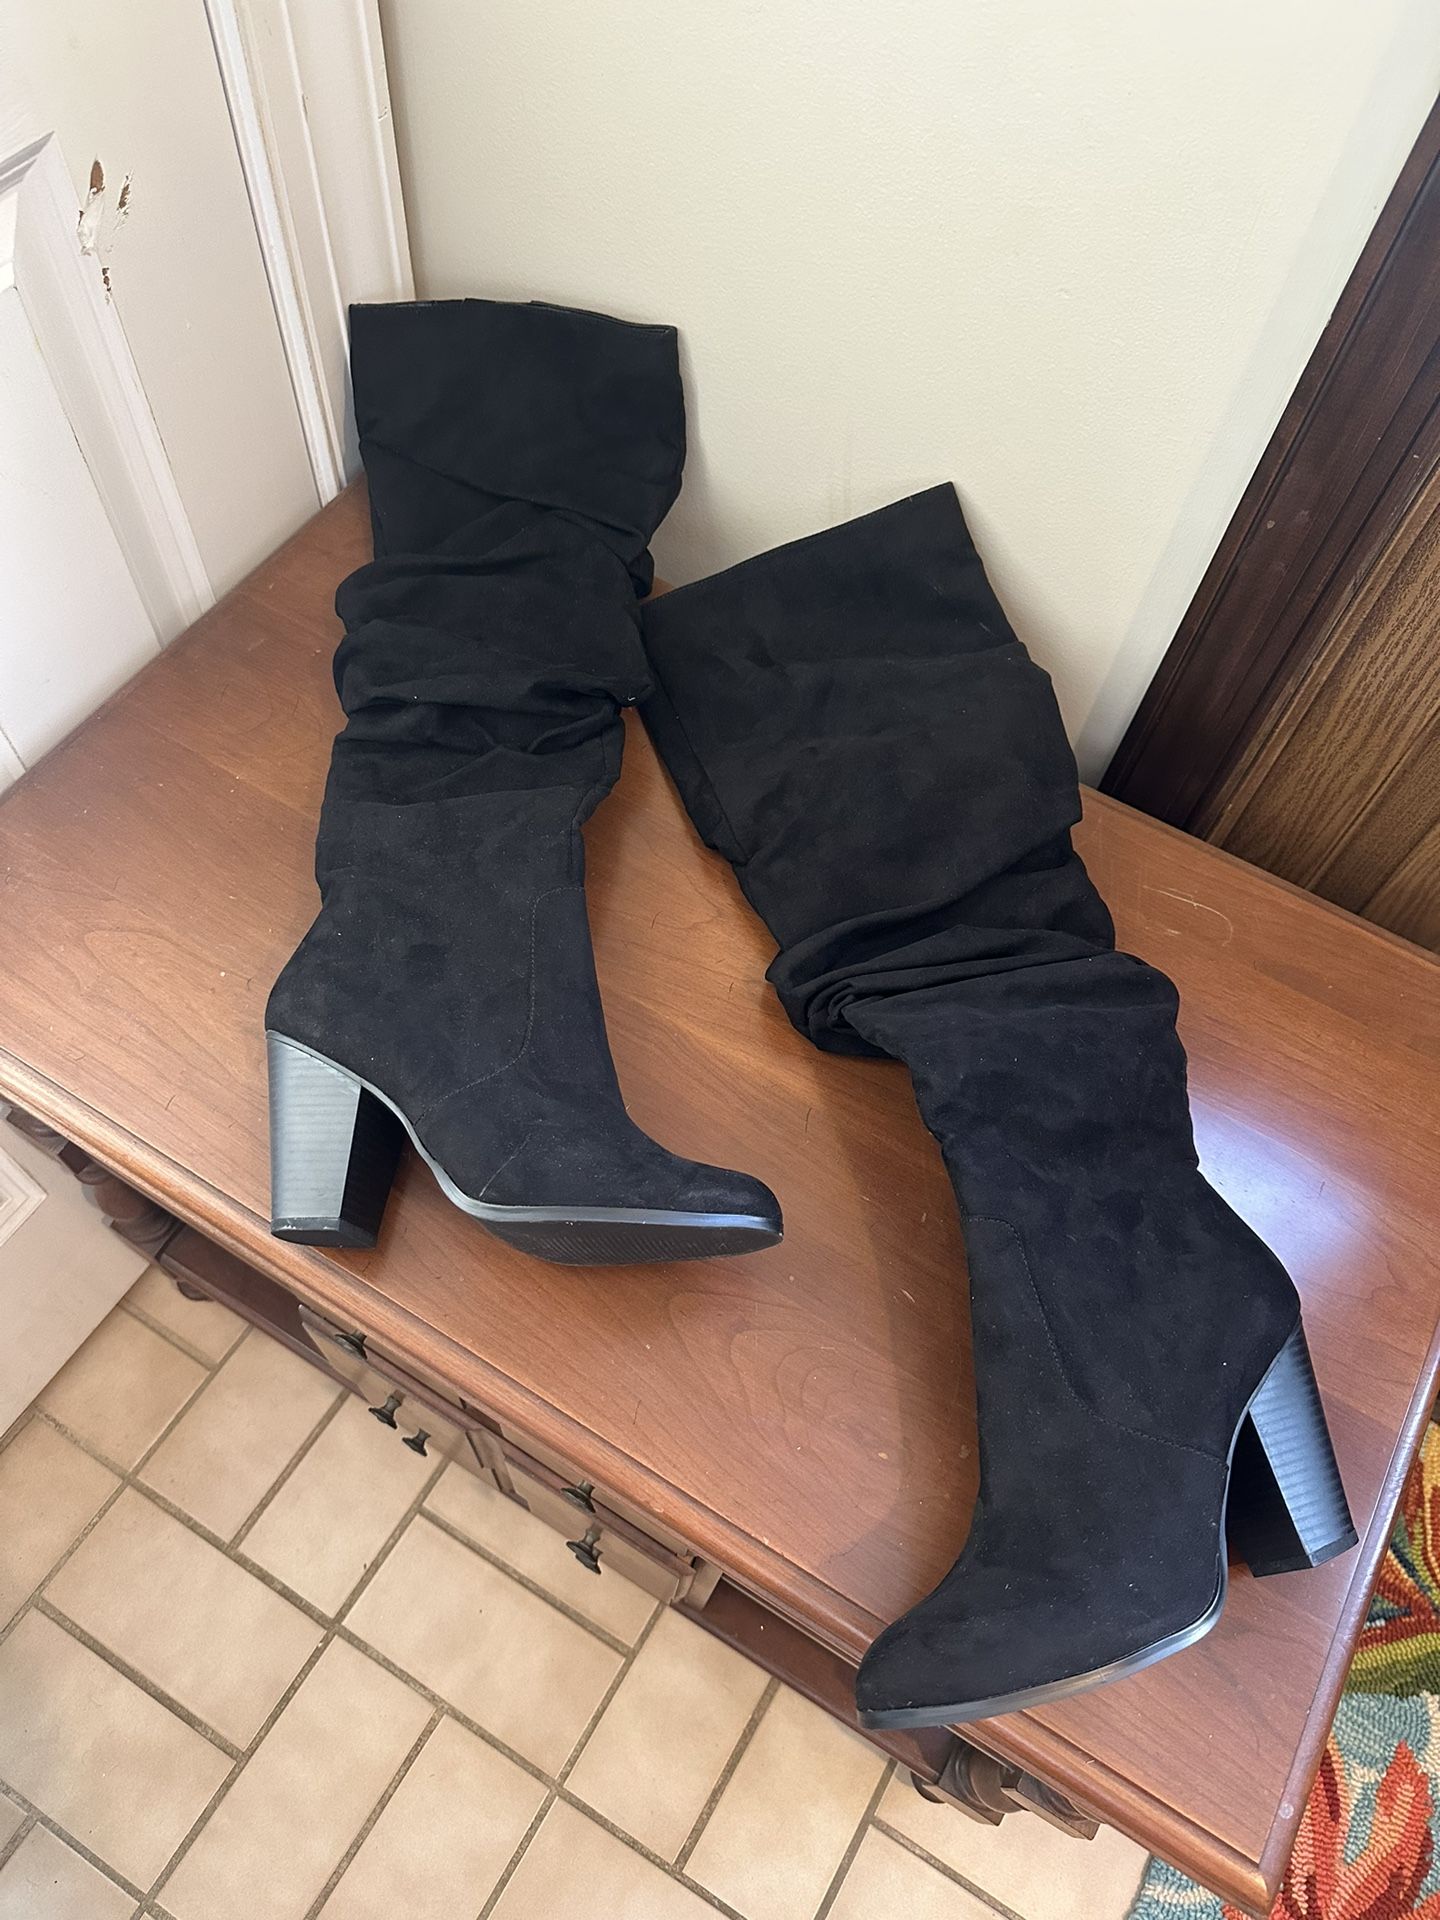 Women’s Suede Boots (New!) - (Multiple Sizes)